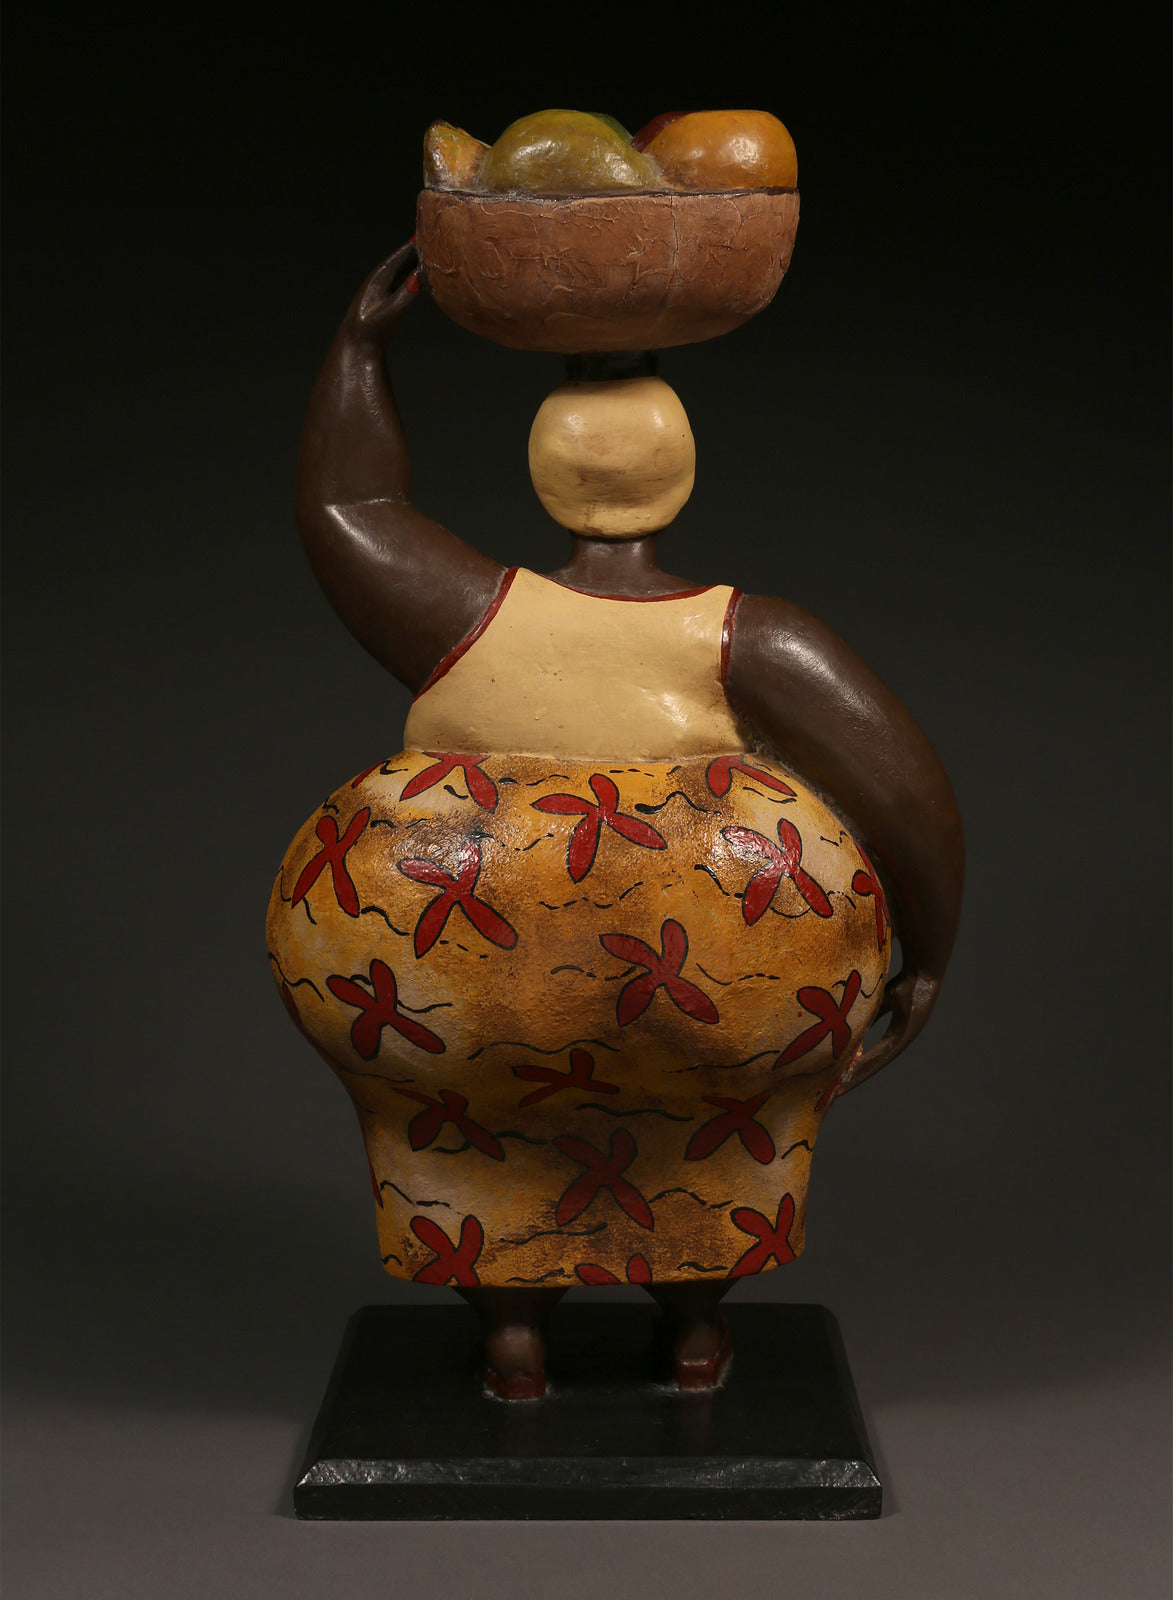 Handcrafted Sculptures - African Art - Home Decor - Wood - Statue - Figurine - Woman Carrying - Fruit Basket - Painted